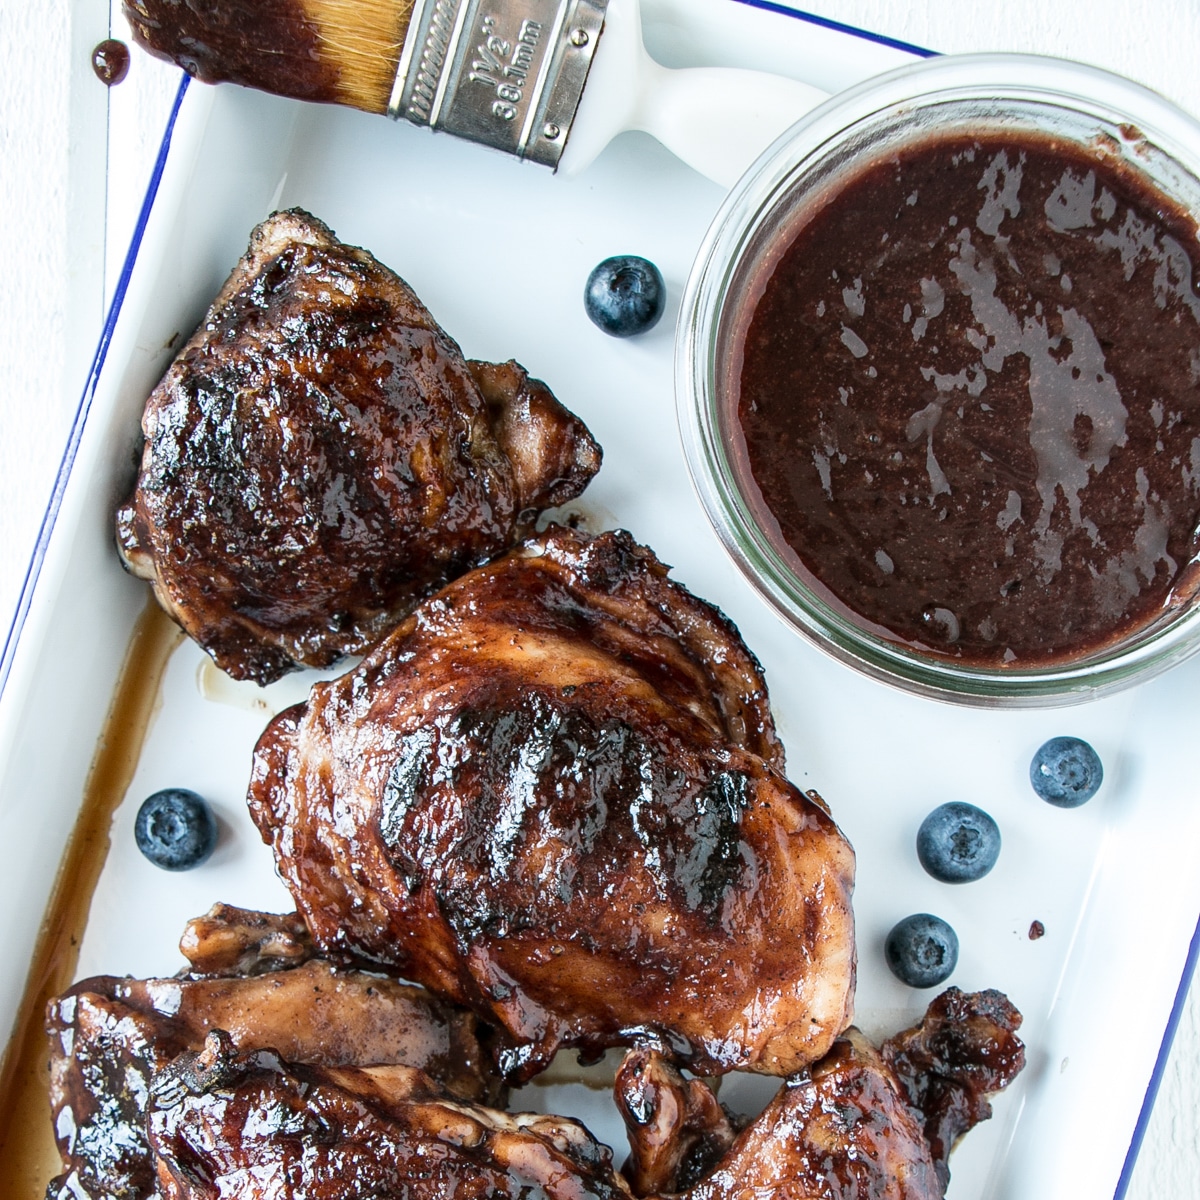 Slow Cooker Blueberry BBQ Sauce on grilled chicken thighs and some sauce in a jar off to the side.